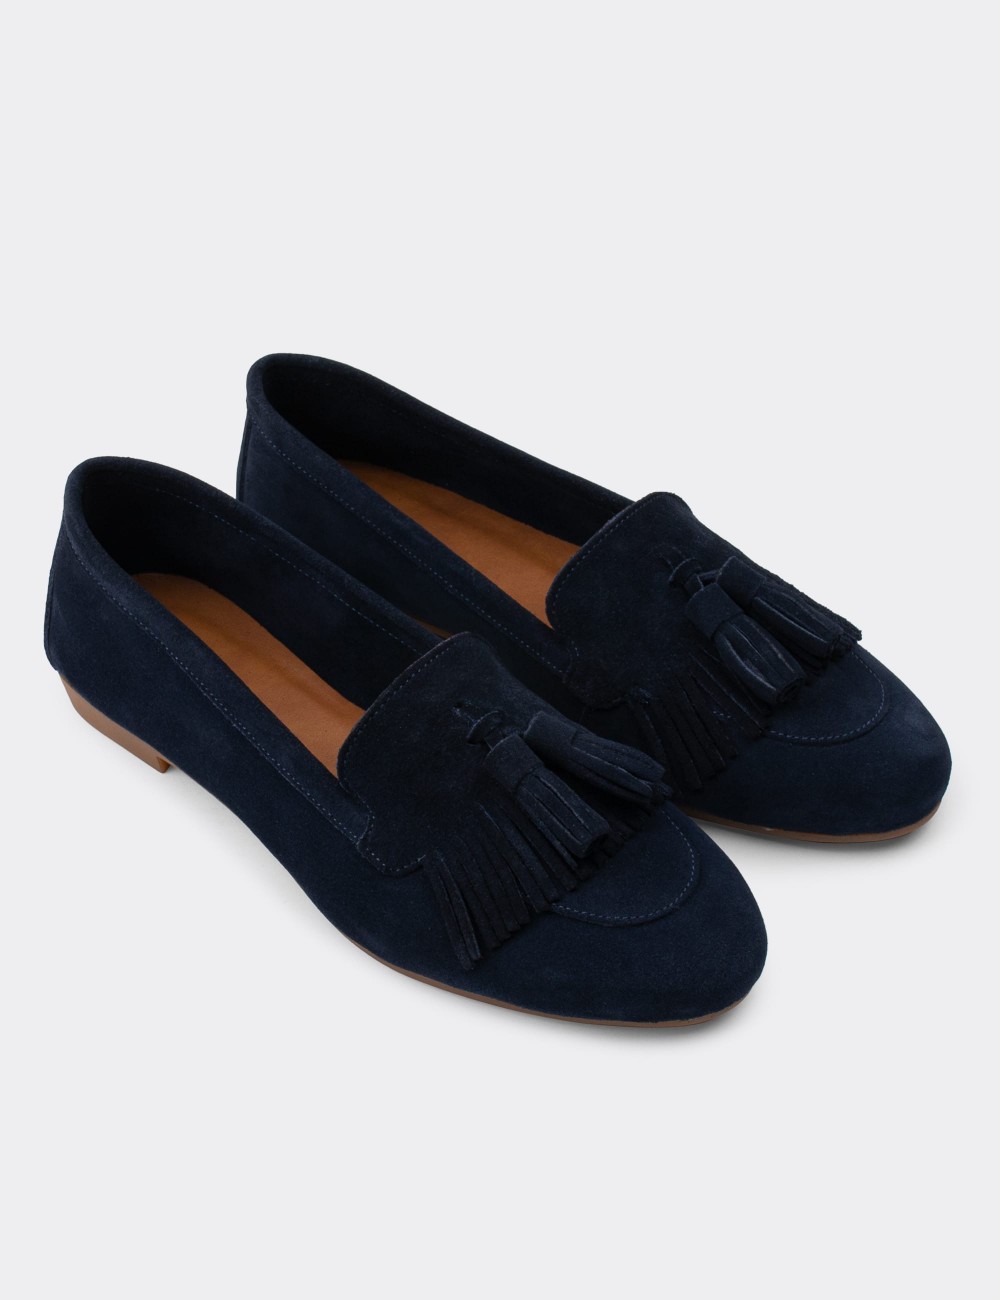 Navy Suede Leather Loafers - E3203ZLCVC02